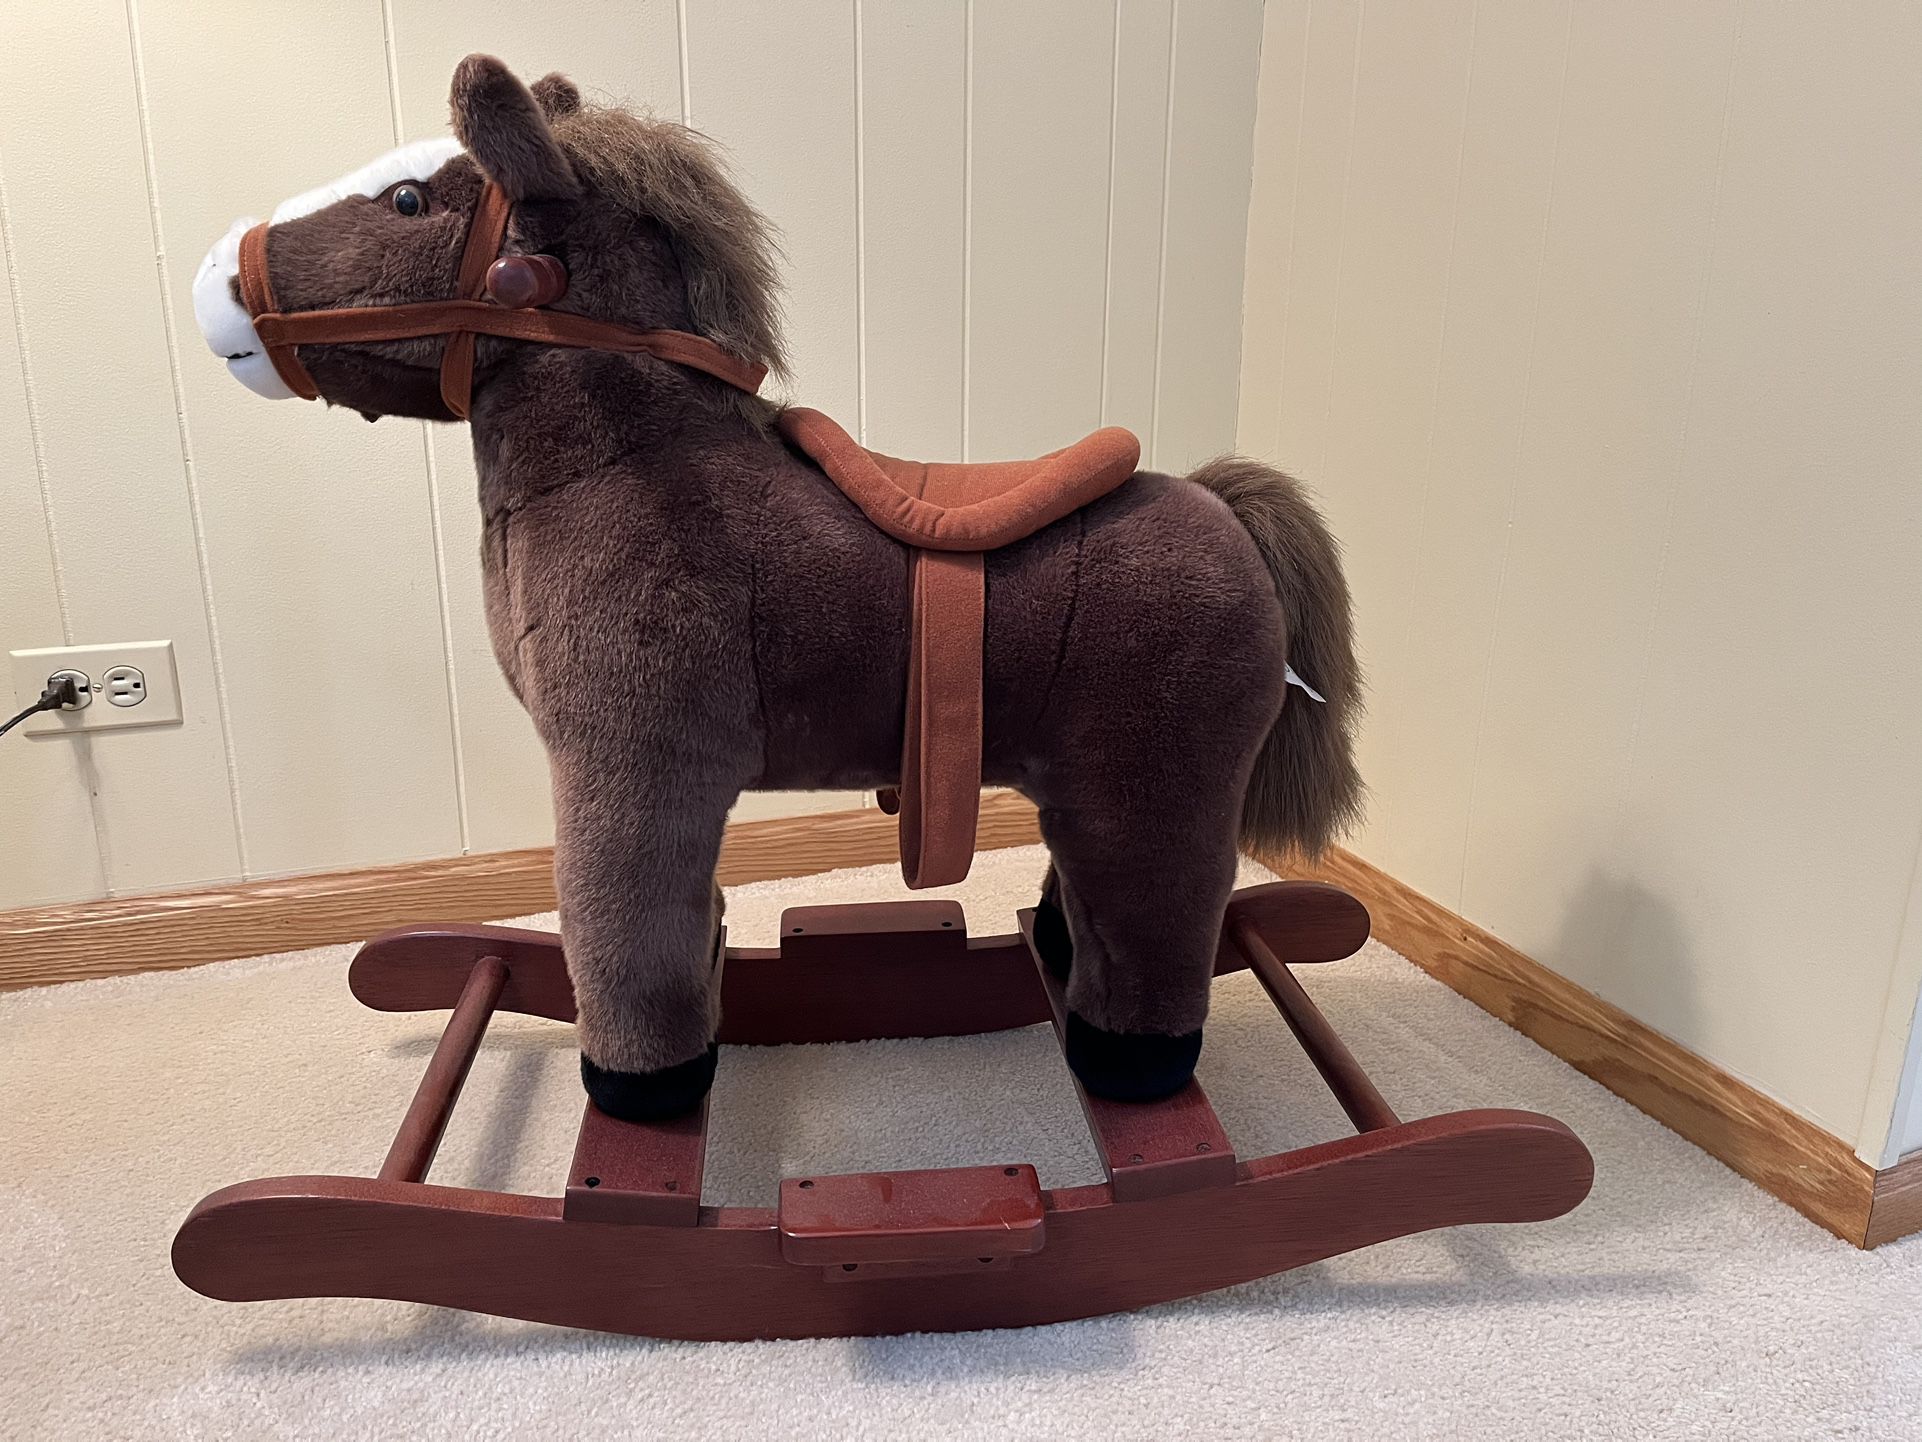 ORVIS PLUSH ROCKING HORSE WITH WOODEN RAILS--VERY SOFT AND WELL CONSTRUCTED